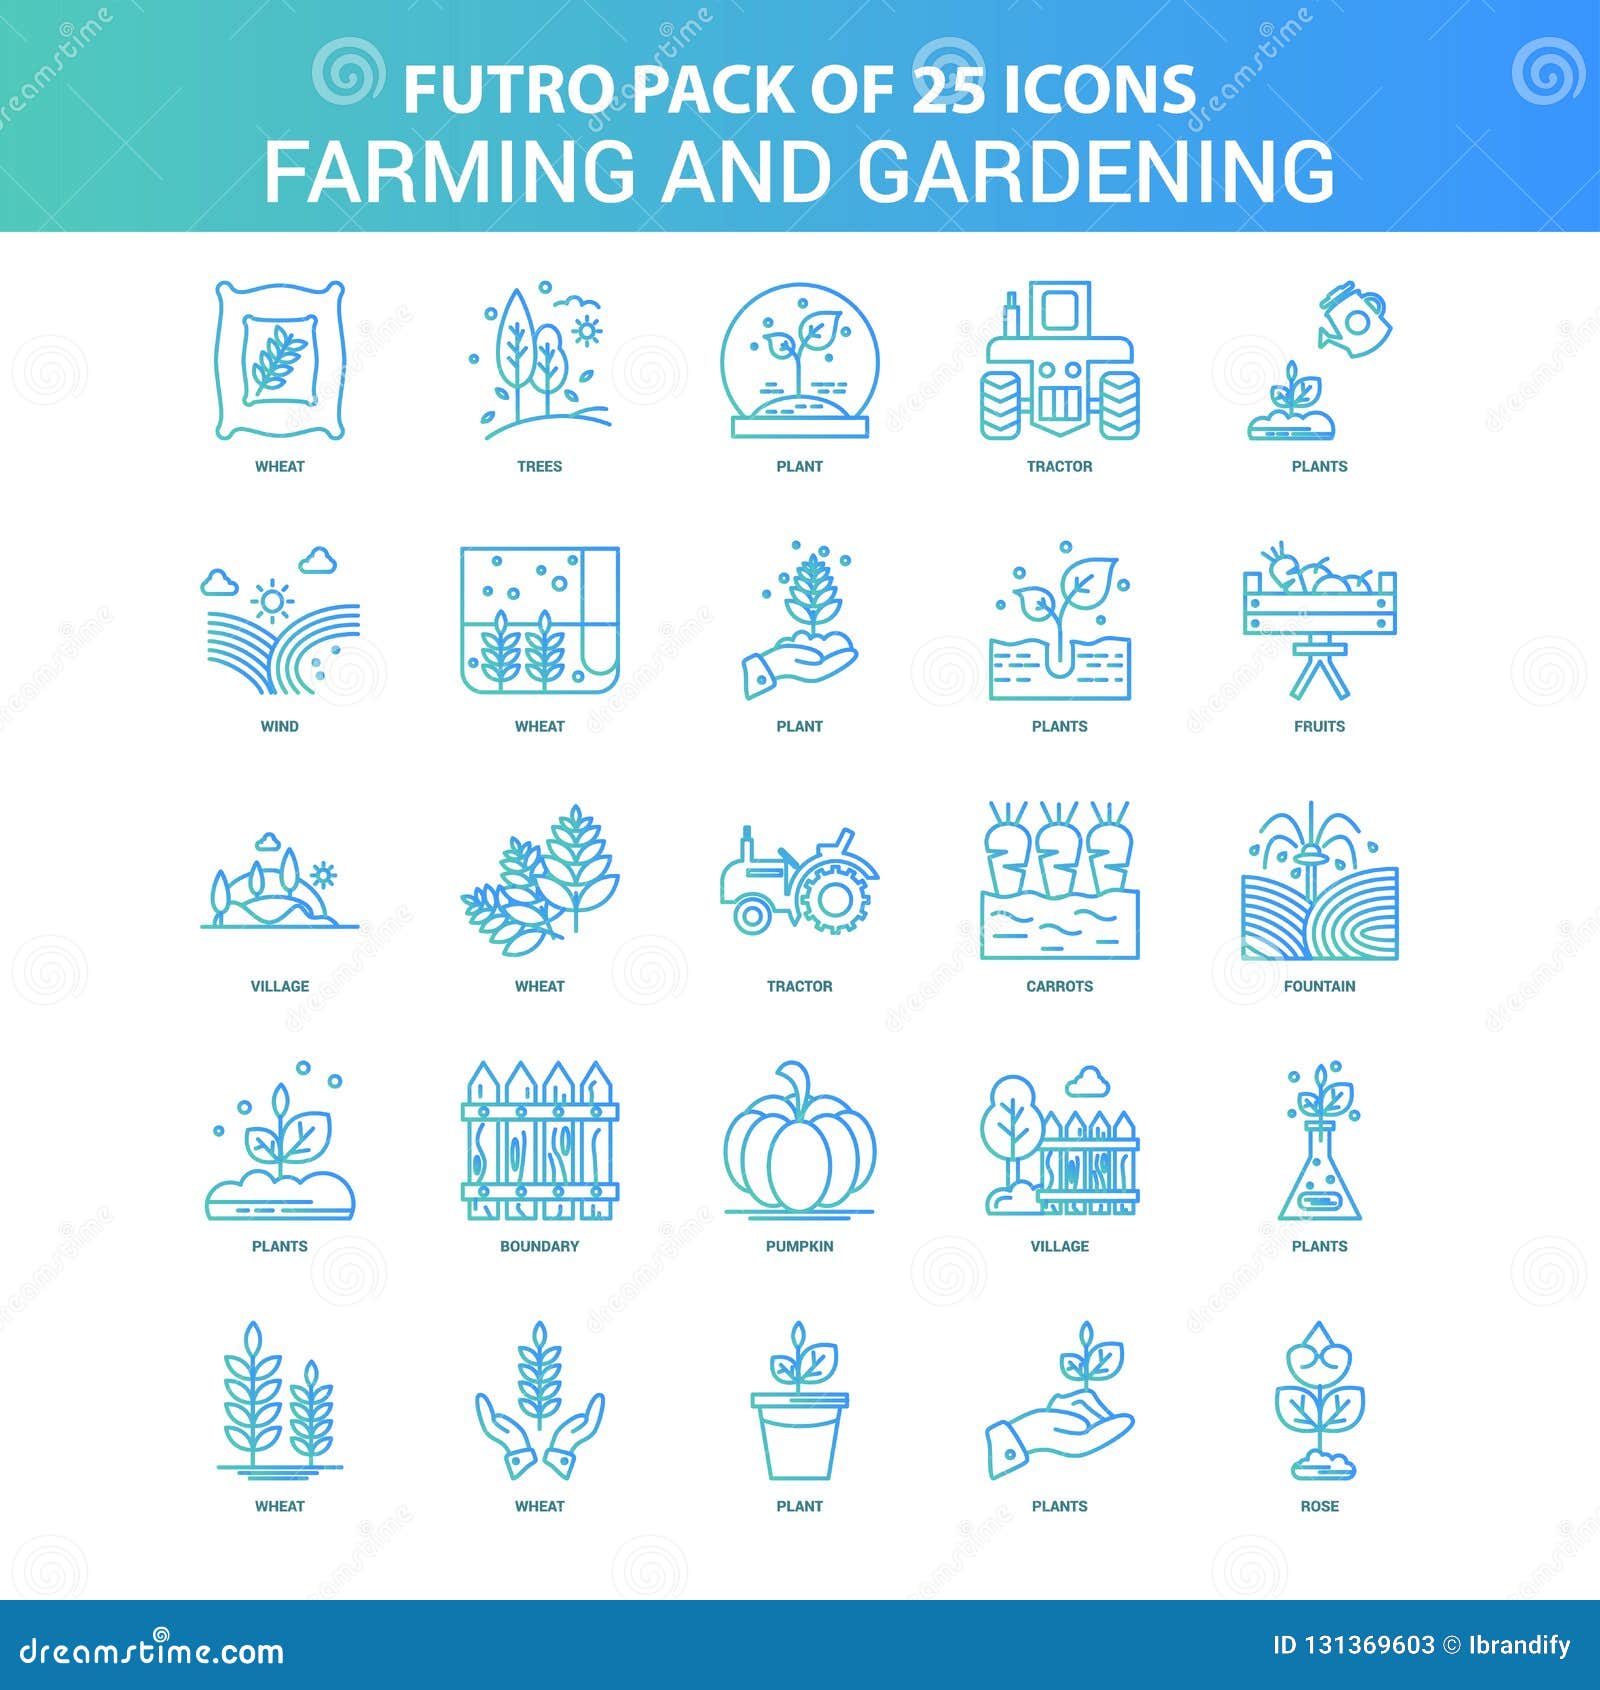 25 green and blue futuro farming and gardening icon pack